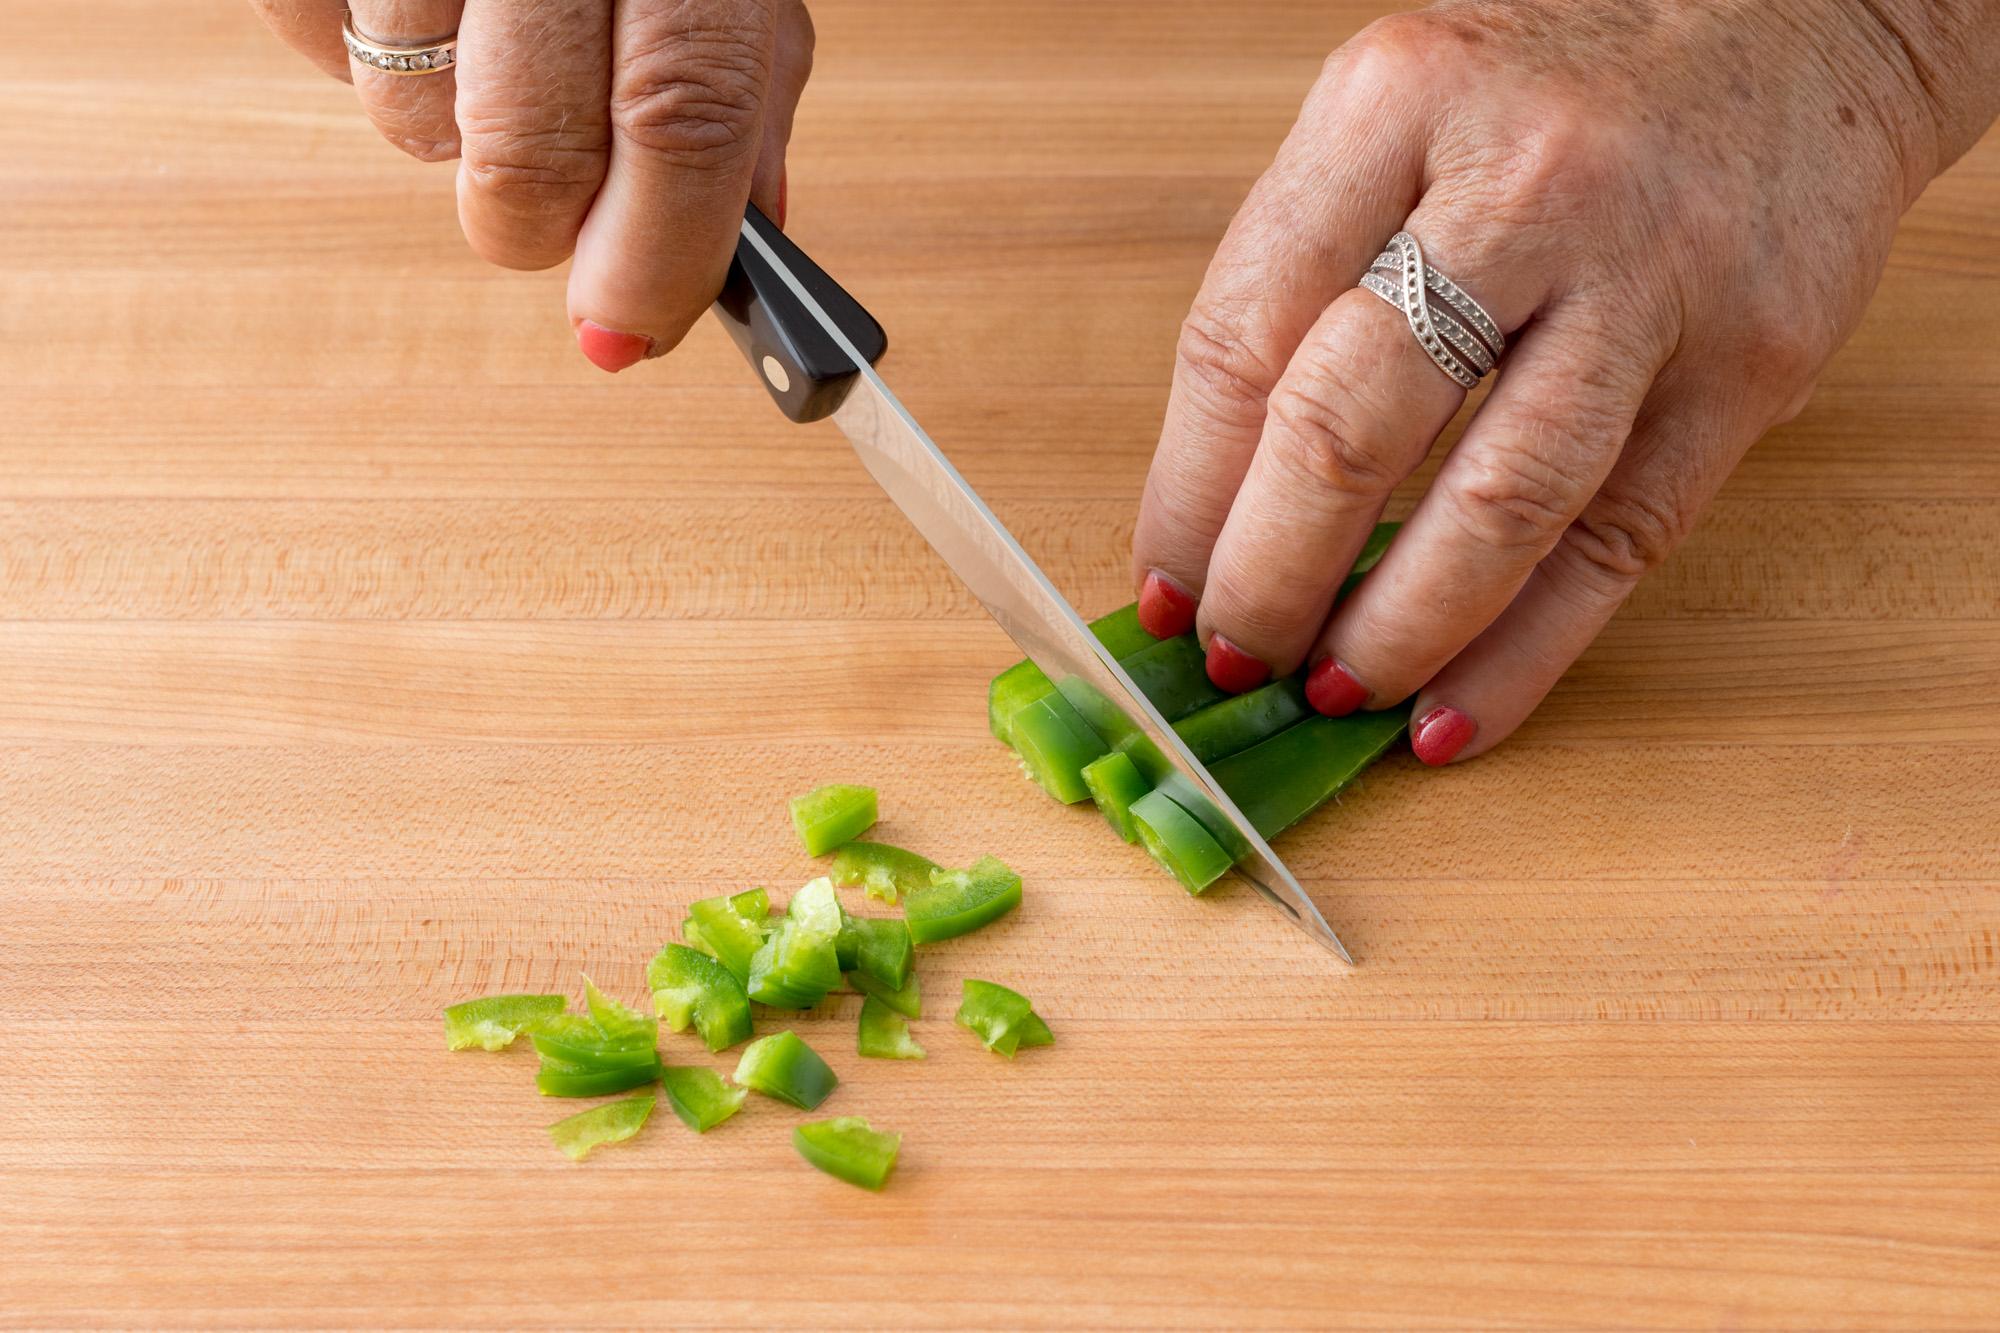 Using a 4 Inch Gourmet Paring Knife to mince the jalapeno.